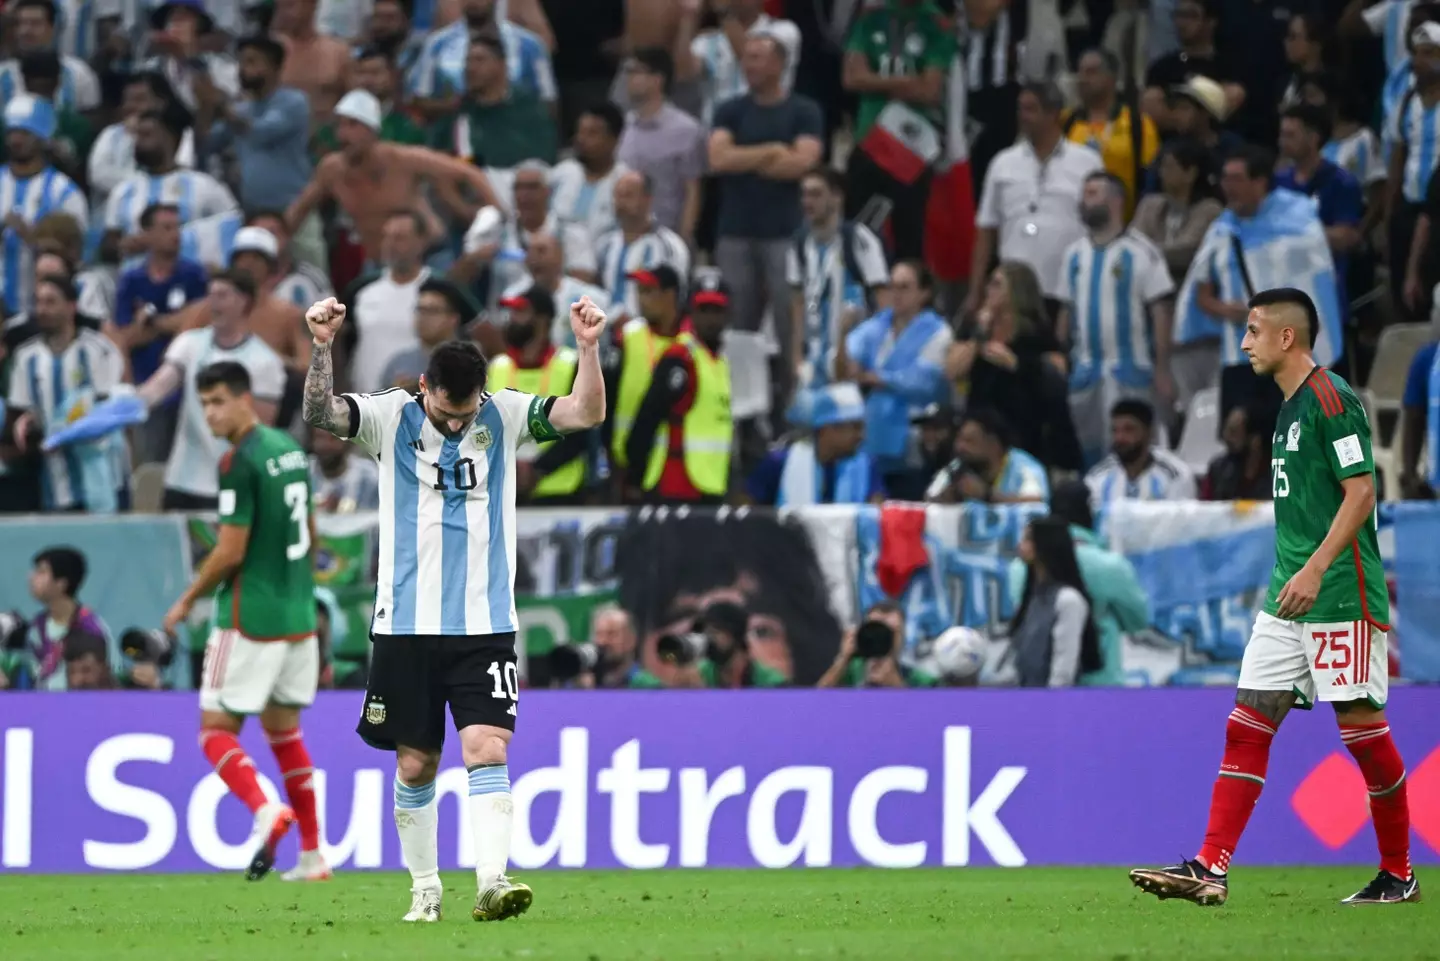 Lionel Messi scored Argentina's opening goal in a 2-0 win over Mexico.